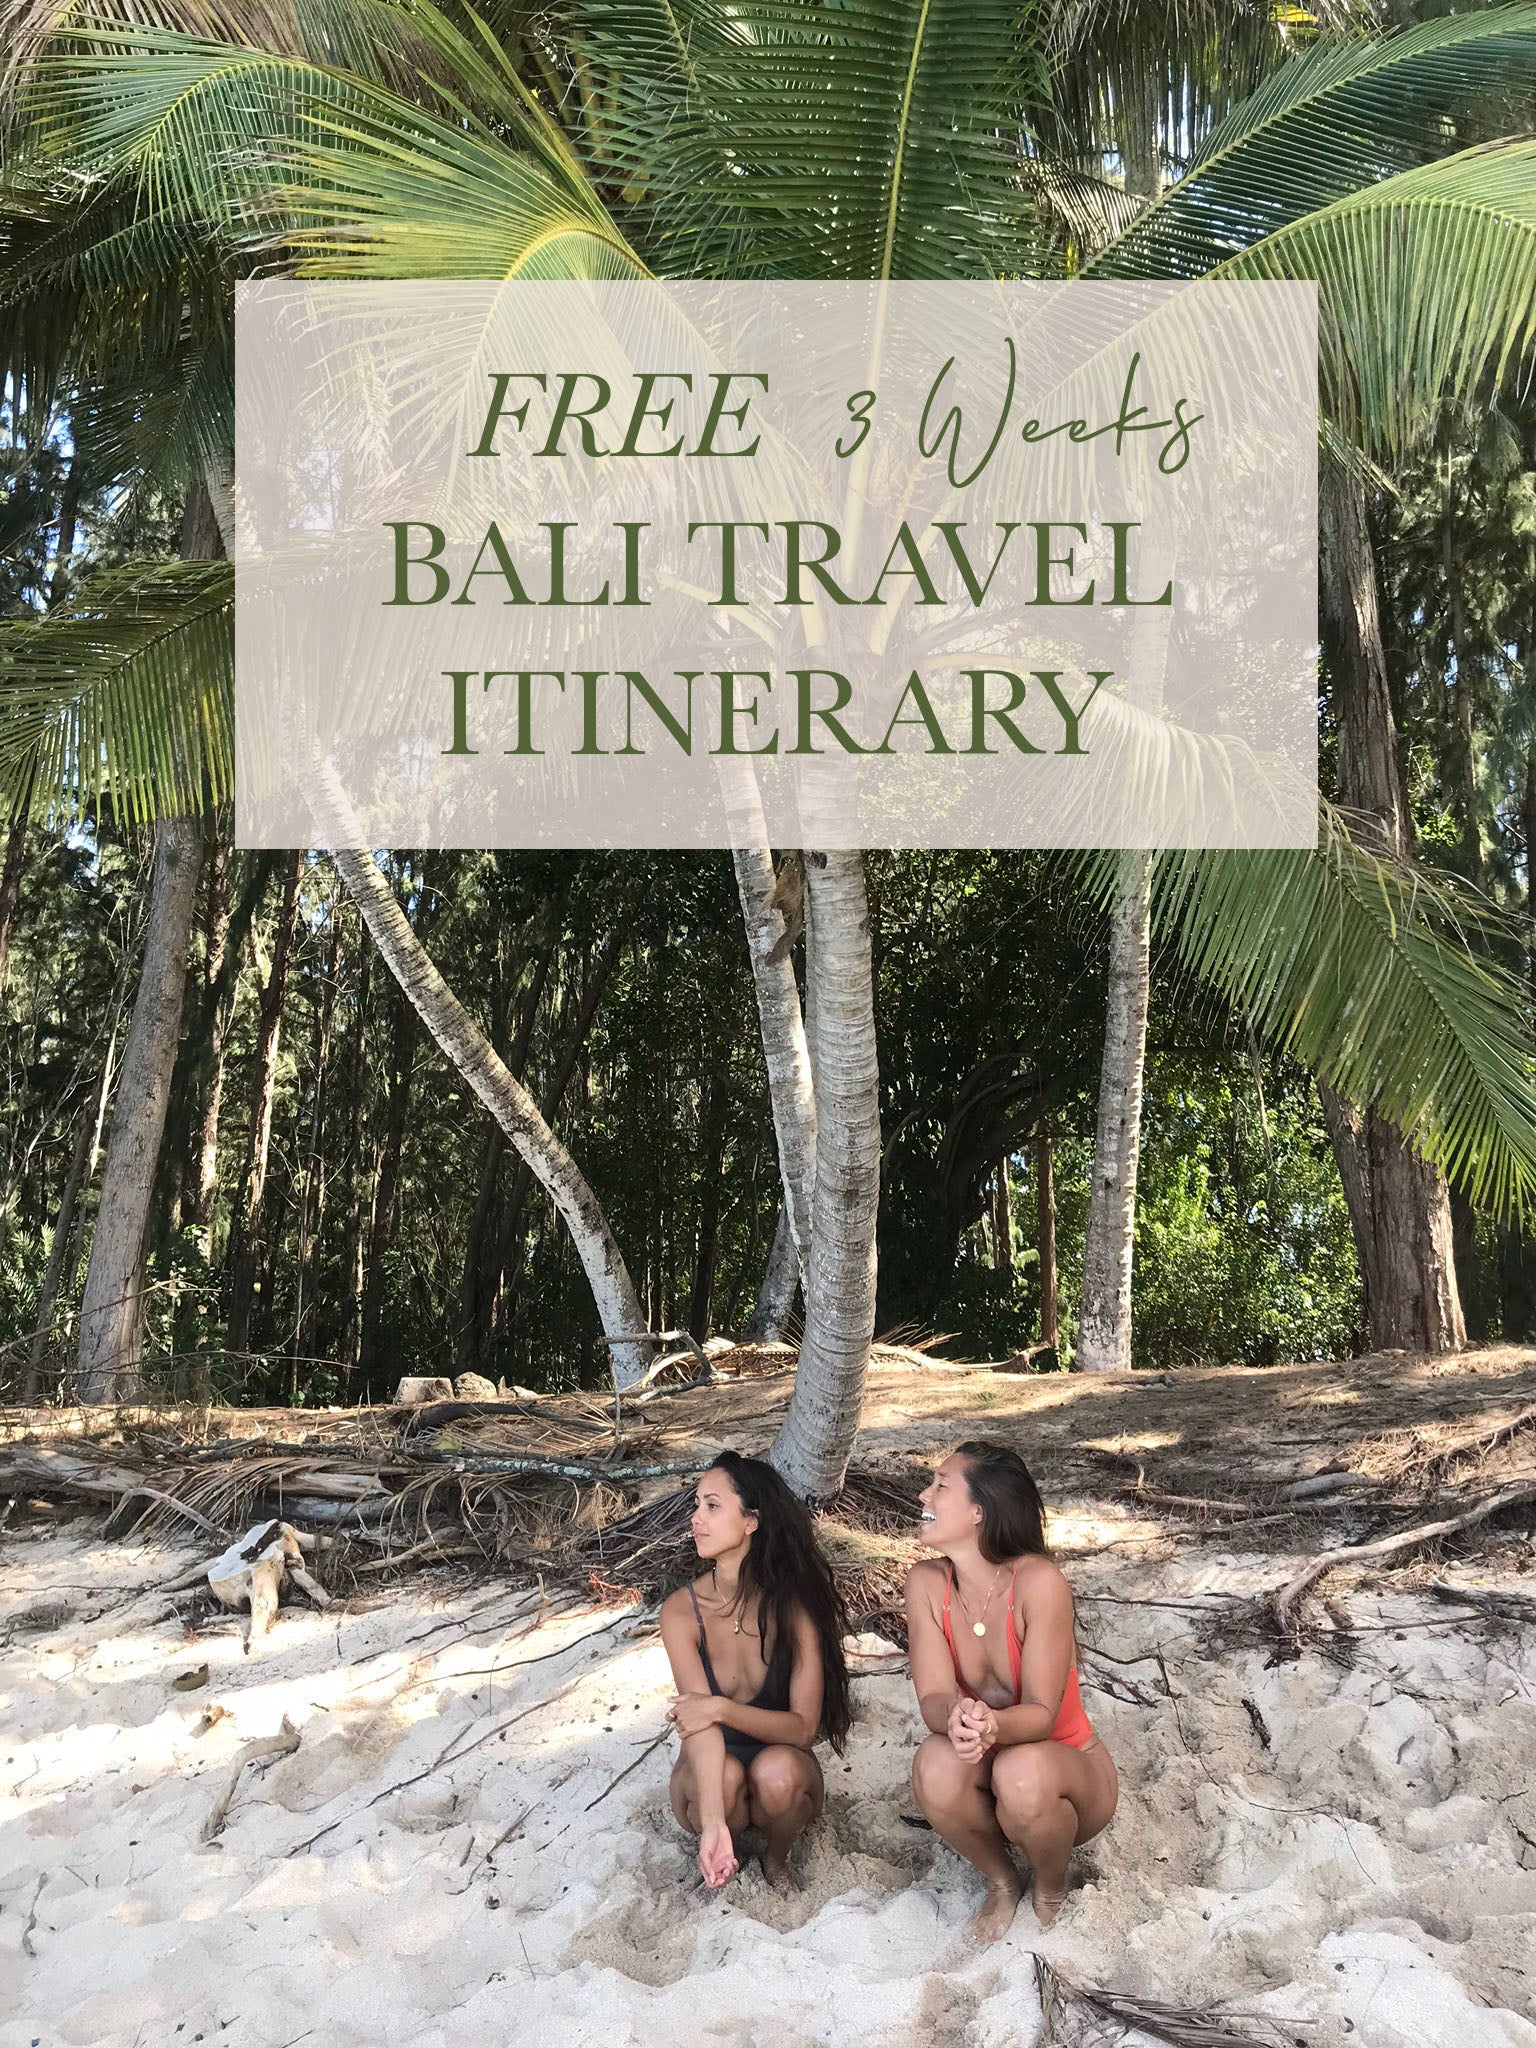 The Ultimate 3-Week Bali Travel Guide. Our Travel Passport